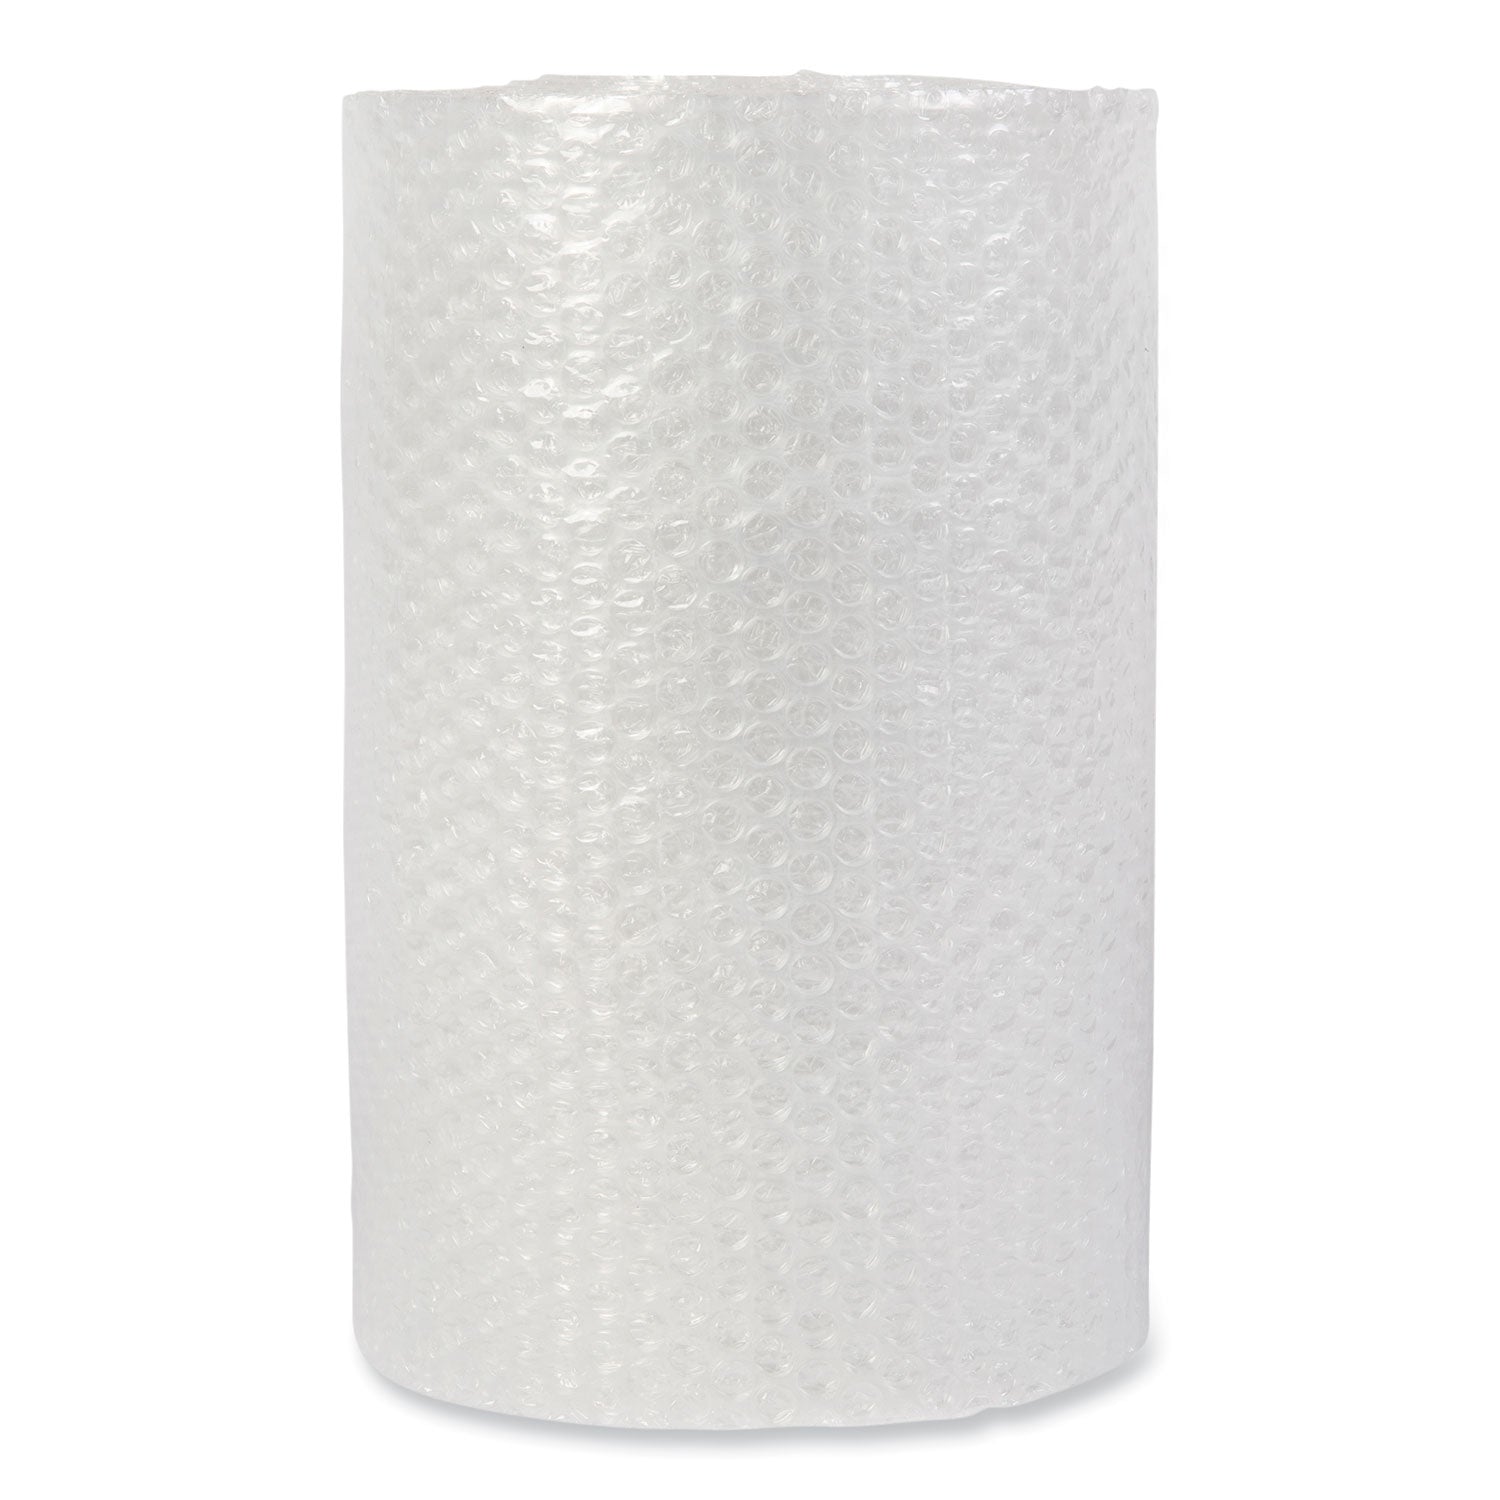 bubble-packaging-031-thick-12-x-125-ft-perforated-every-12-clear-4-carton_unv4087870 - 2